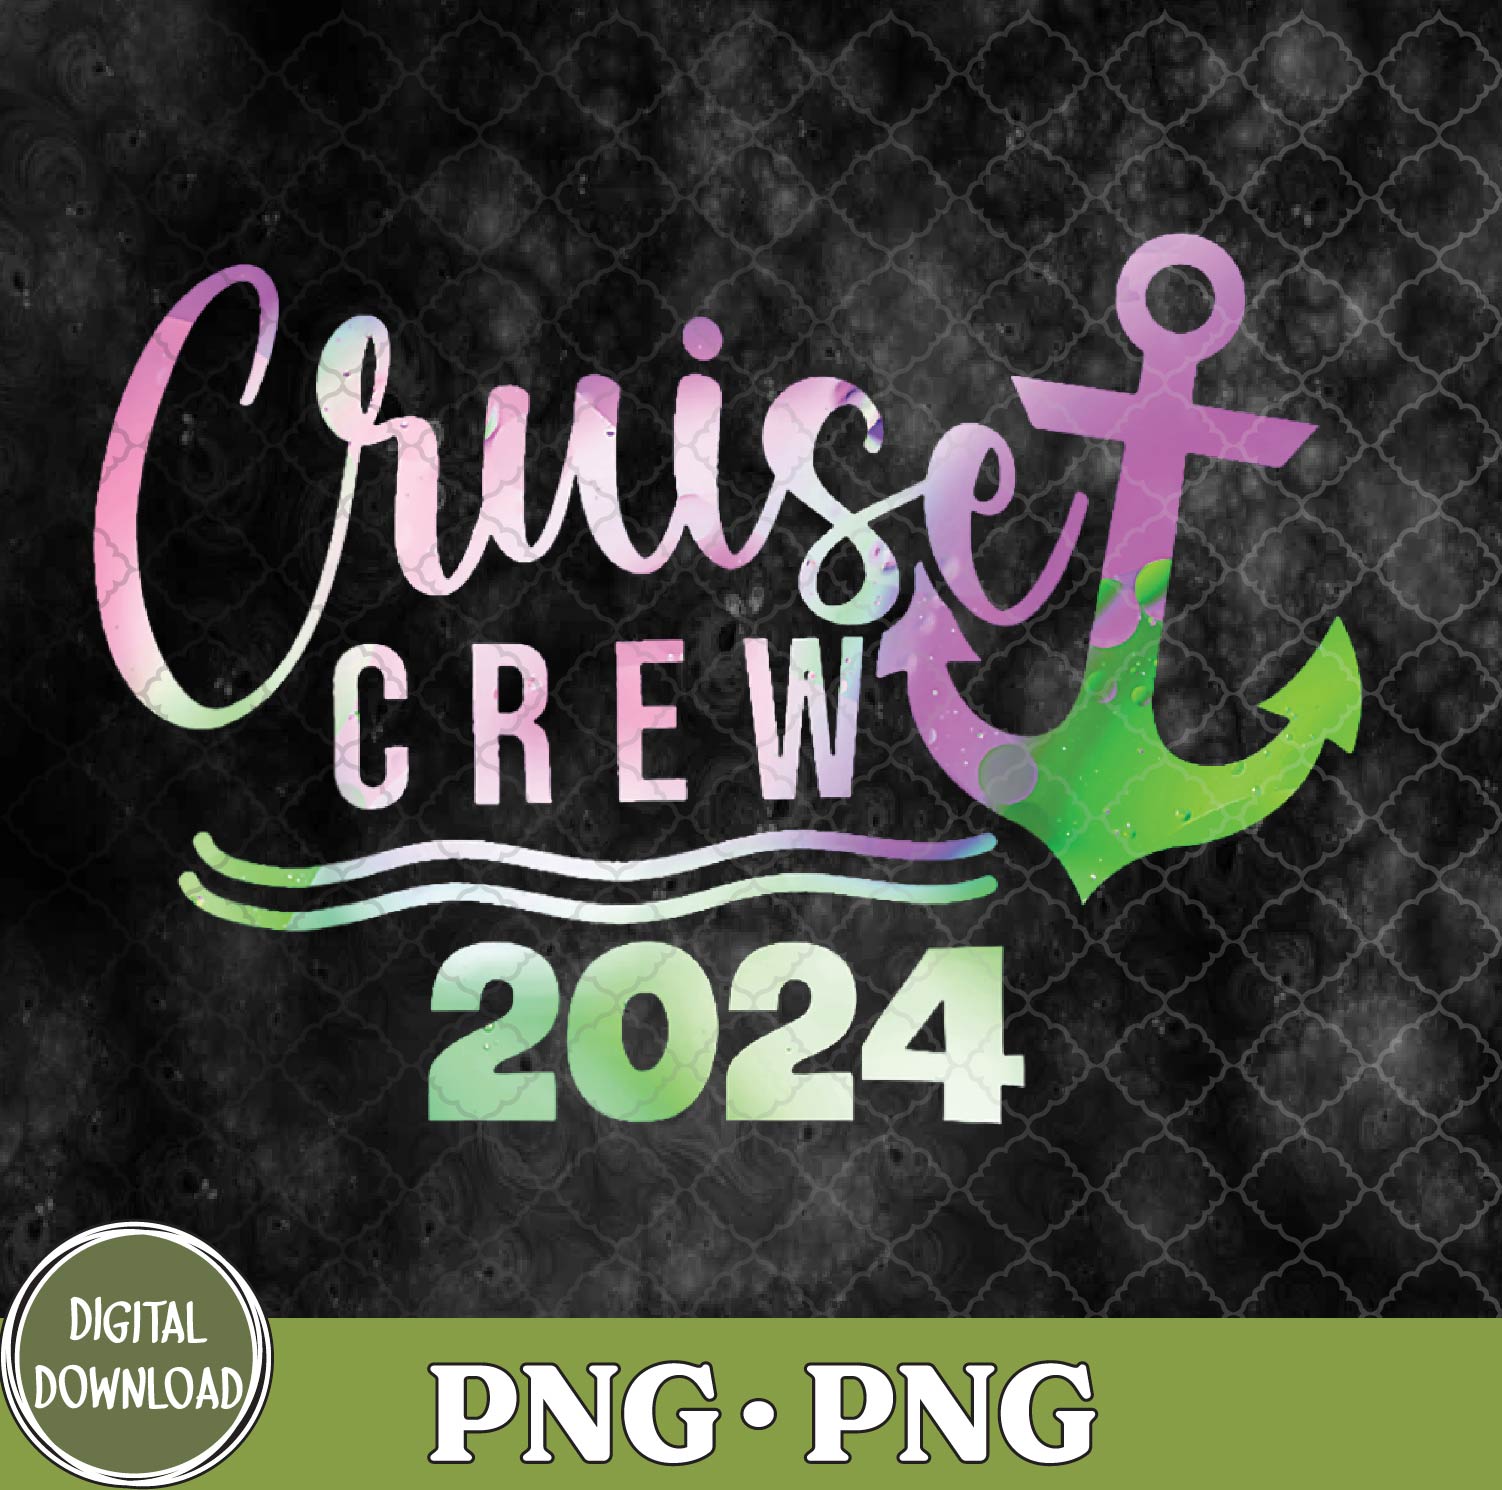 WTMNEW9file 09 73 CRUISE CREW PNG